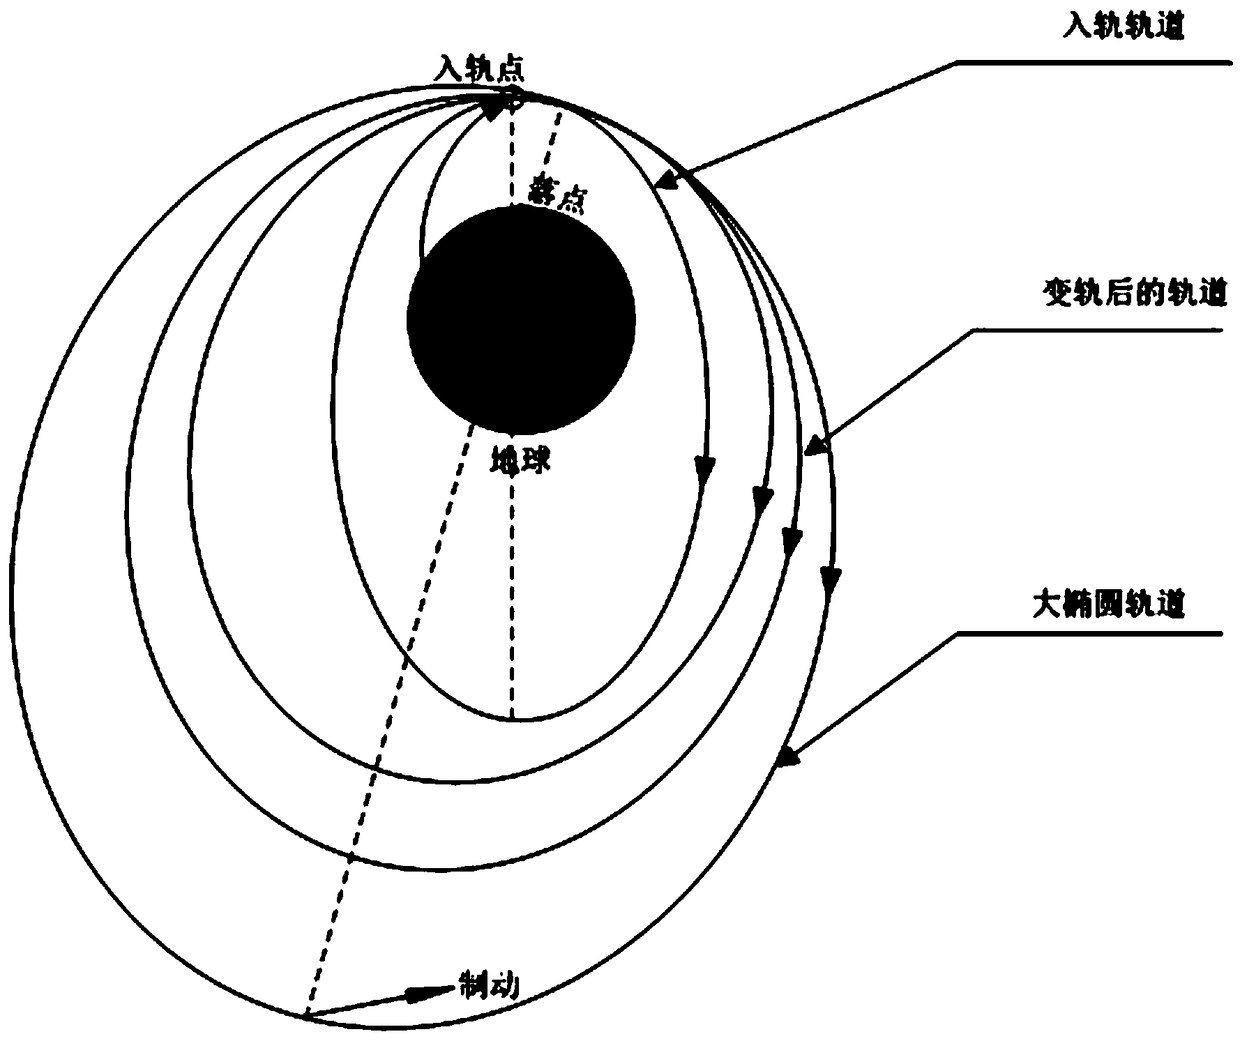 A large elliptical orbit transfer planning method for spacecraft returning to a predetermined landing point